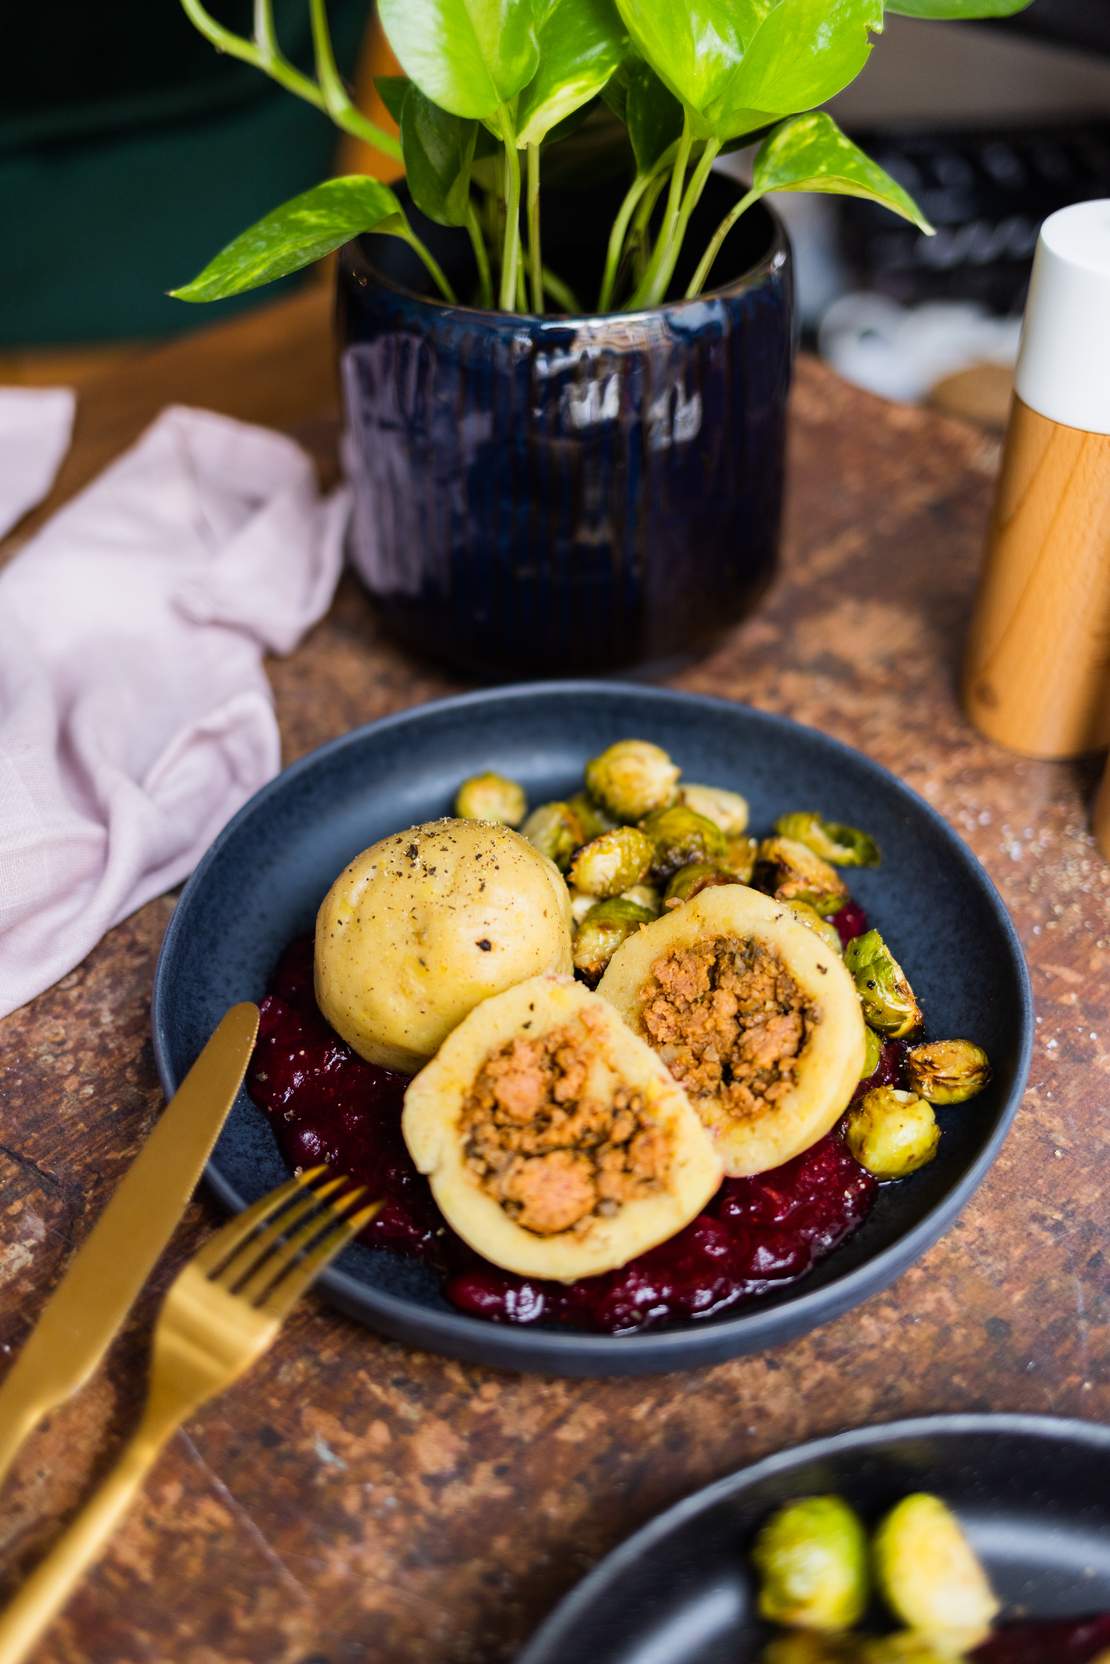 R692 Vegan Stuffed Dumplings with Brussels Sprouts and Cranberry Sauce